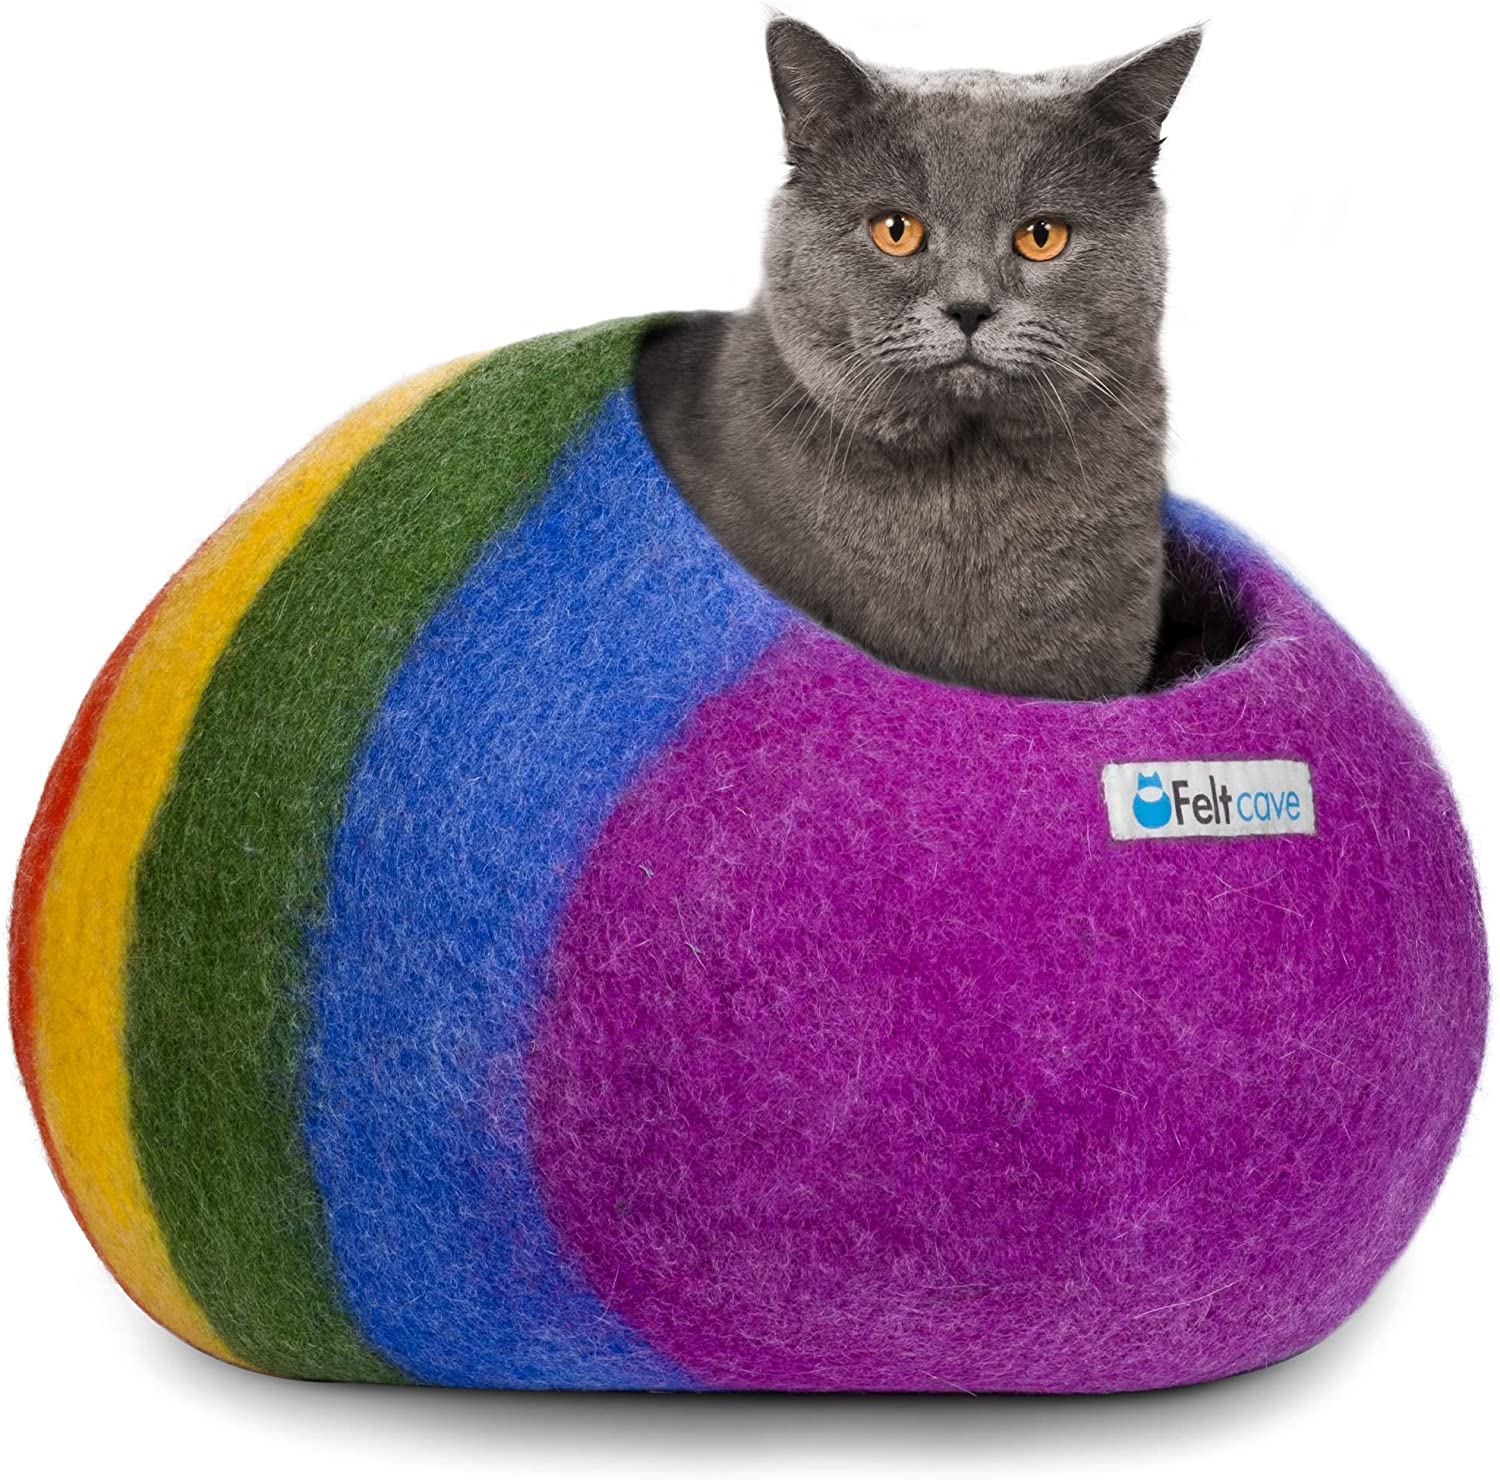 Feltcave Cat Cave Bed, Handmade Covered Cat Bed Cave, Wooly Cave for Cats, Dome Shaped Cat Pod, Cat Beds & Furniture, Felt Cat Beds for Indoor Cats Animals & Pet Supplies > Pet Supplies > Cat Supplies > Cat Beds Feltcave Rainbow  